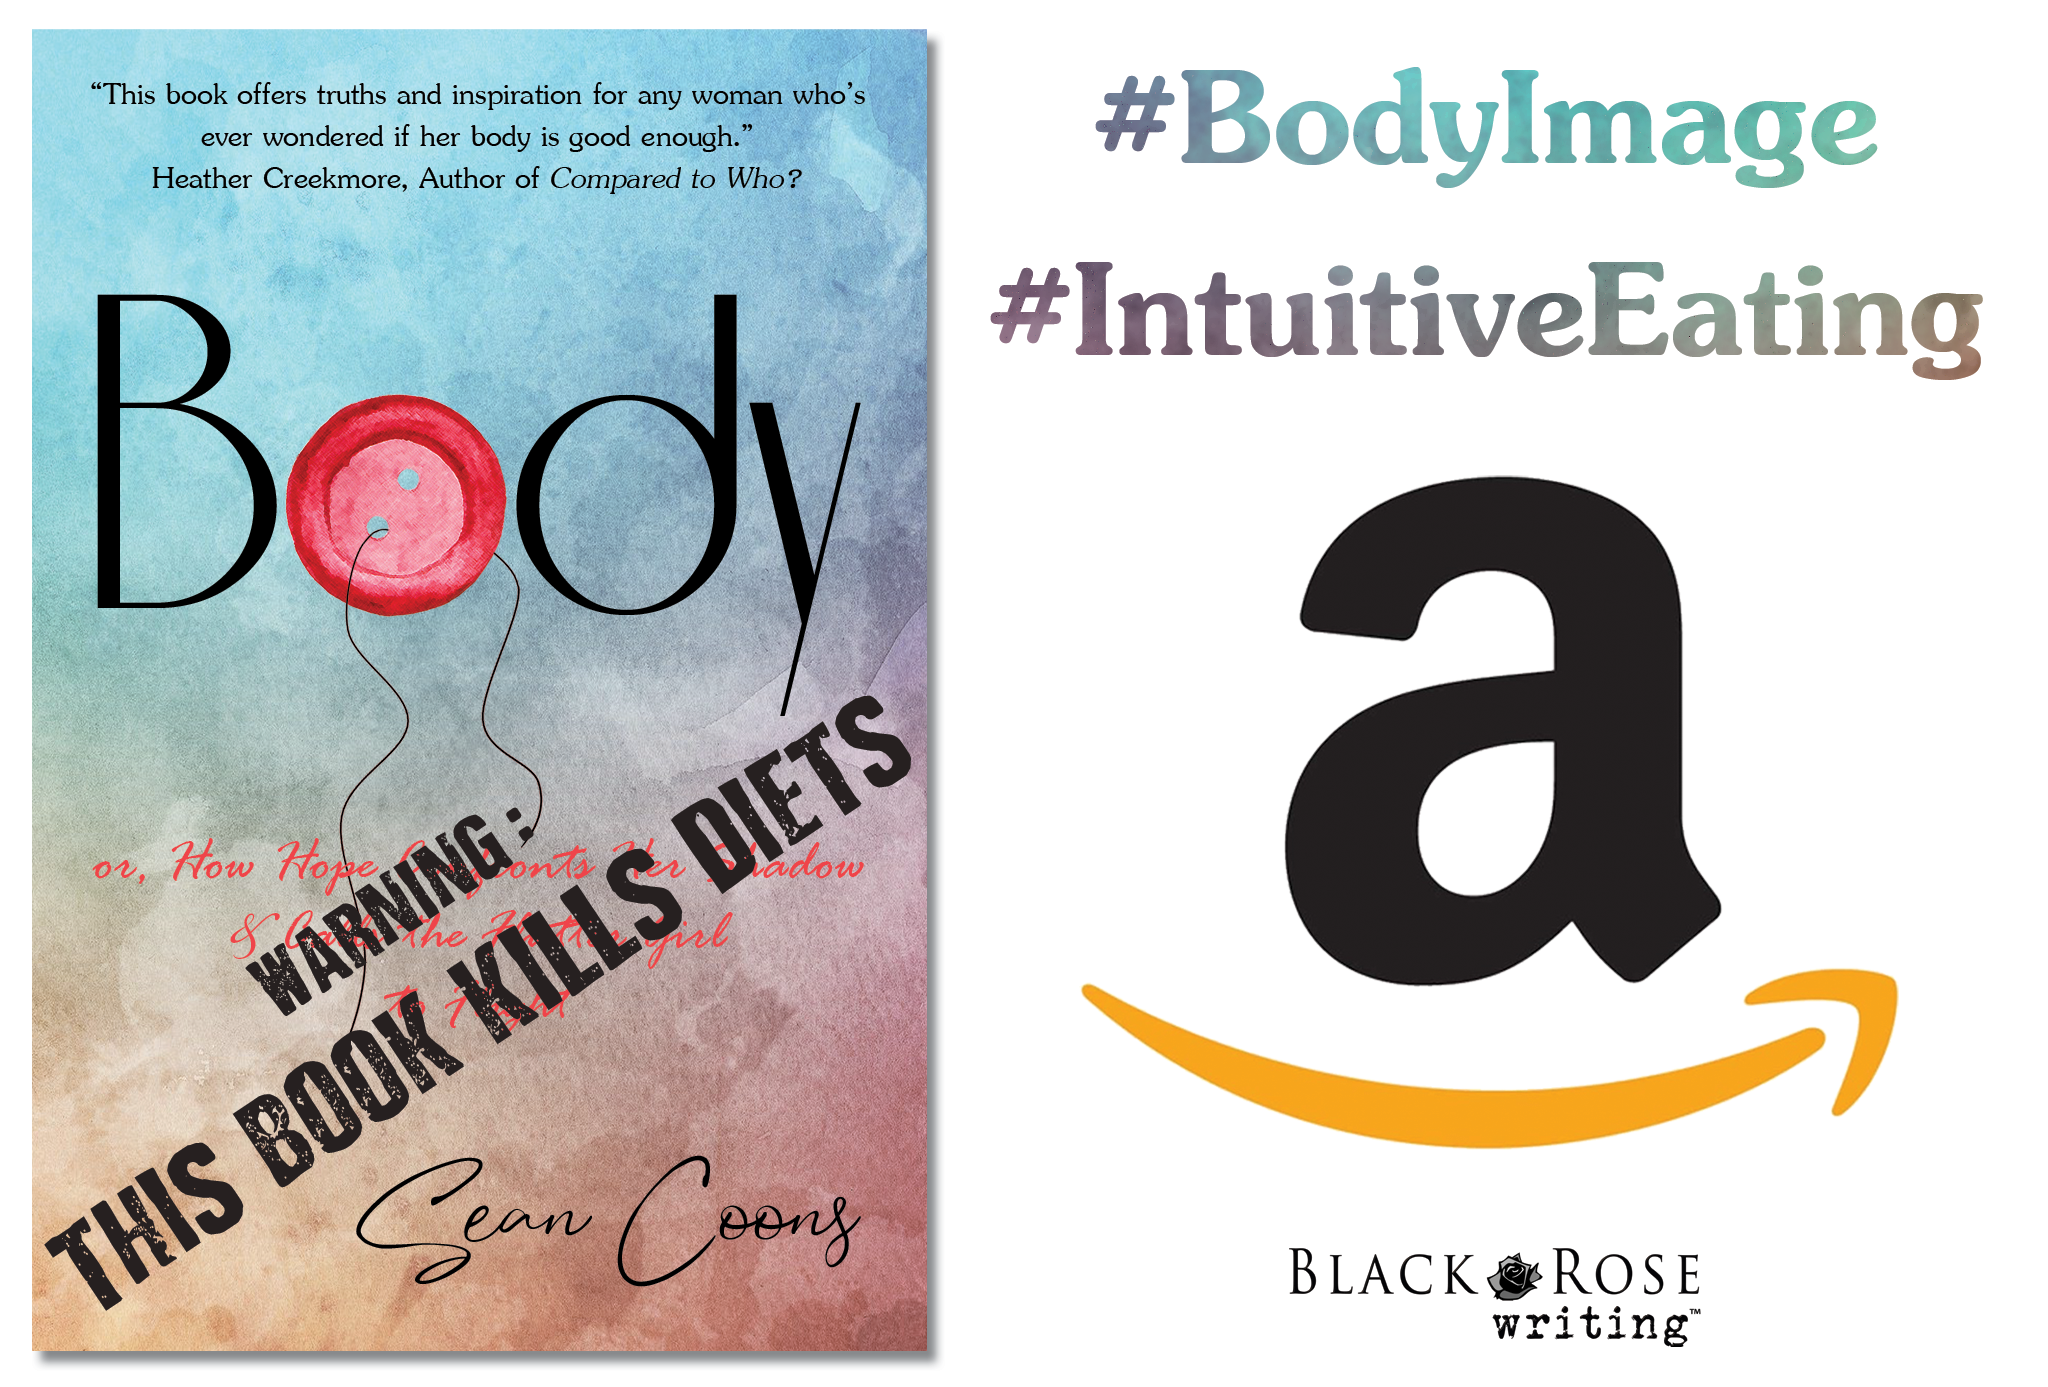 BODY by Sean Coons - body image - intuitive eating